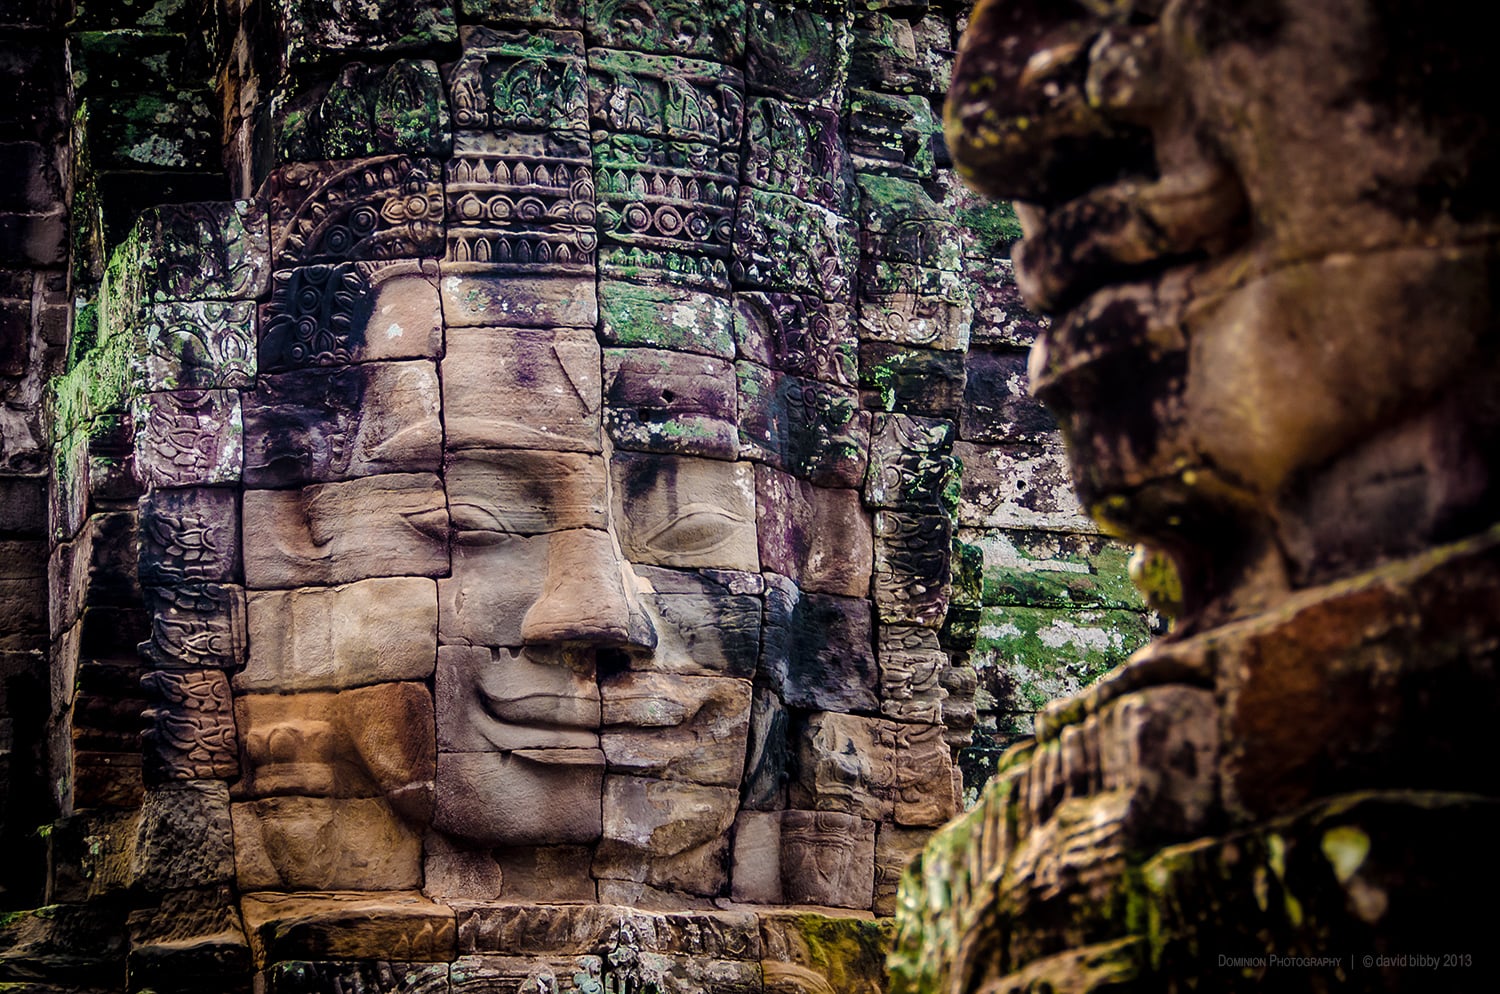   The Bayon  - 12th-13th century temple, Angkor Thom. The most striking aspect of the Bayon temple are the huge faces that adorn every side of the towers. Spectacular and awe inspiring. Angkor, Siem Reap Province, Cambodia. 